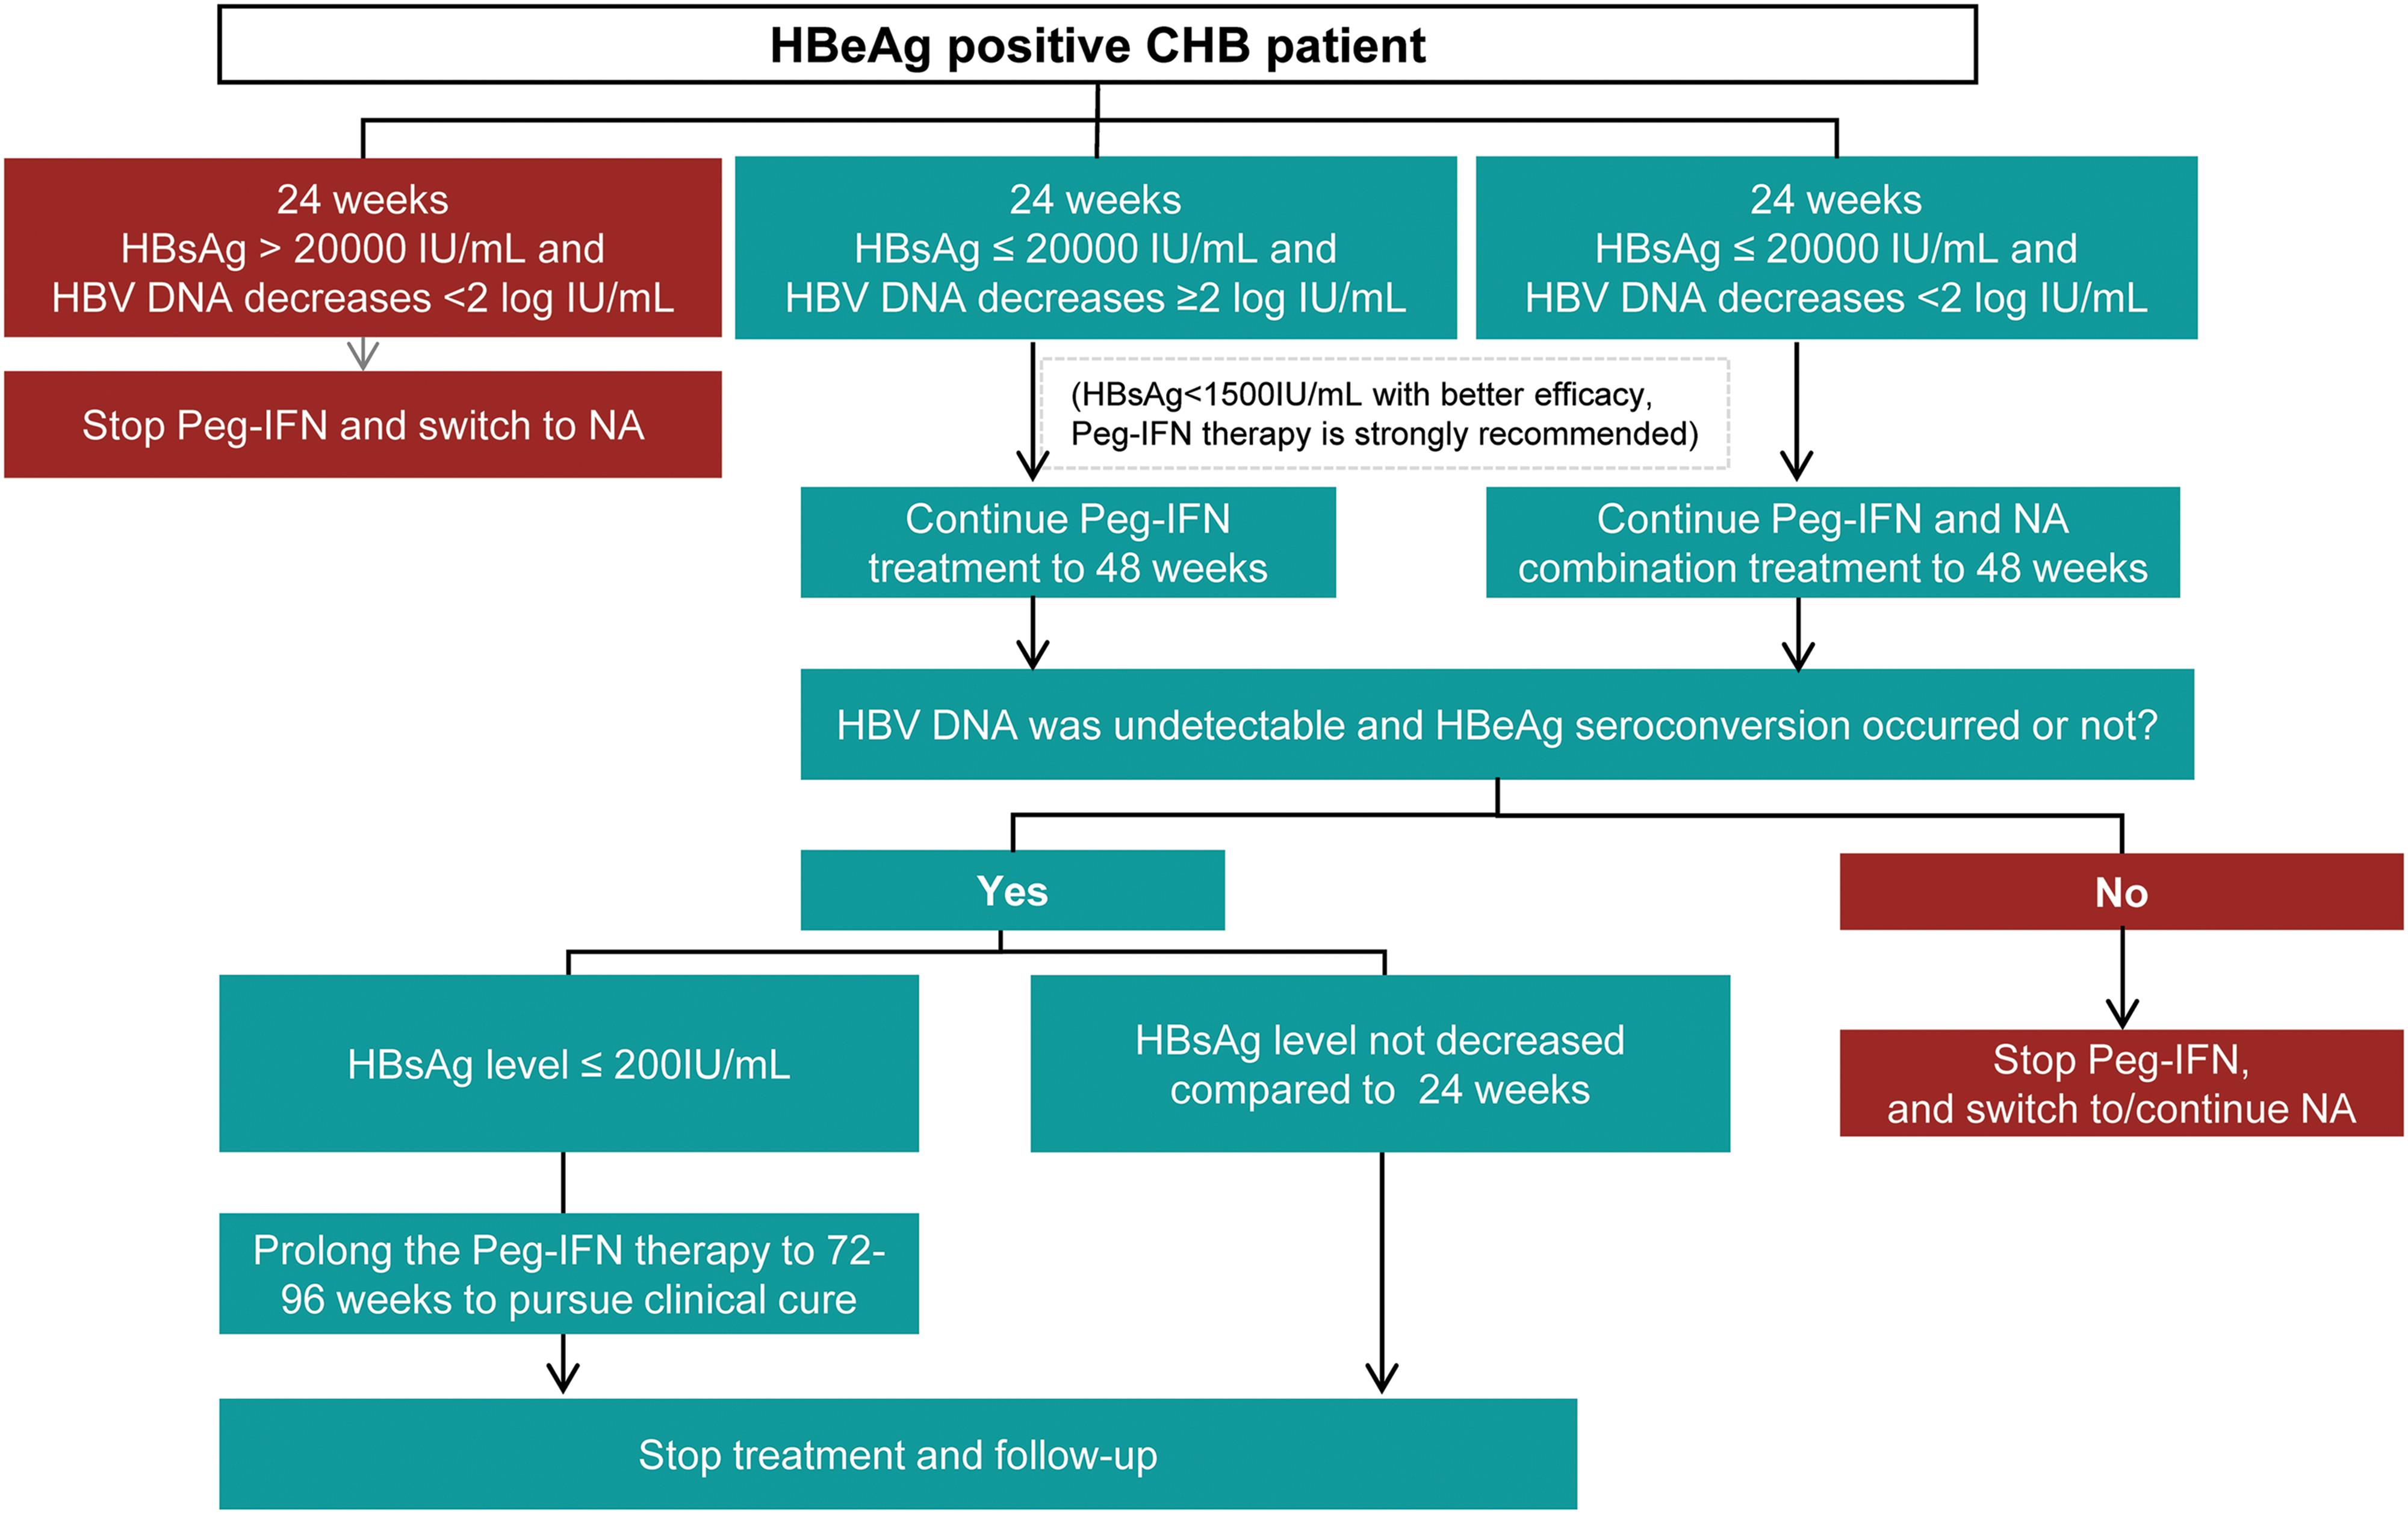 Adjustment during Peg-IFN treatment for HBeAg-positive CHB patients.